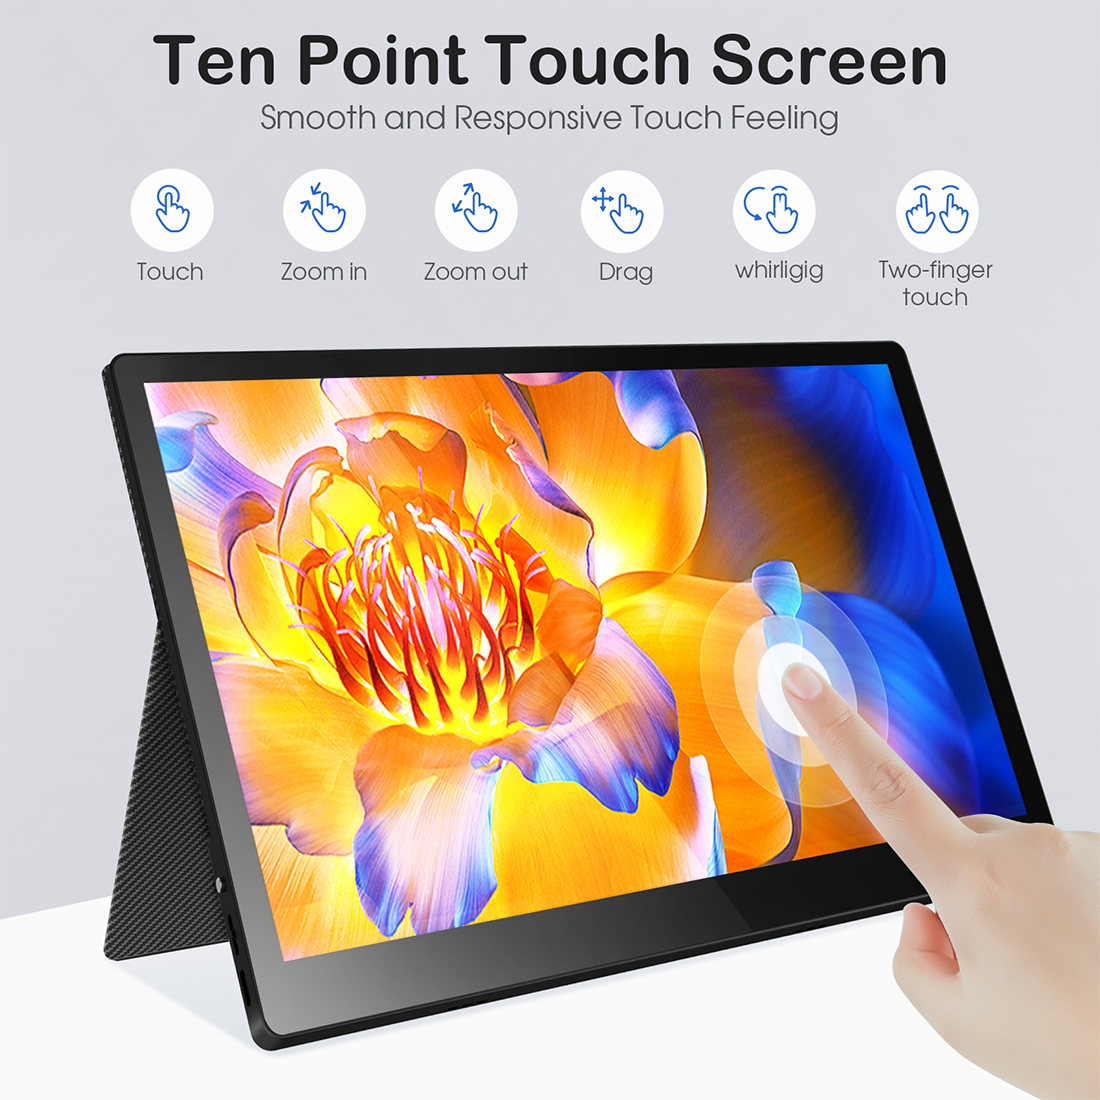 13.3 travel monitor support 10 points touch